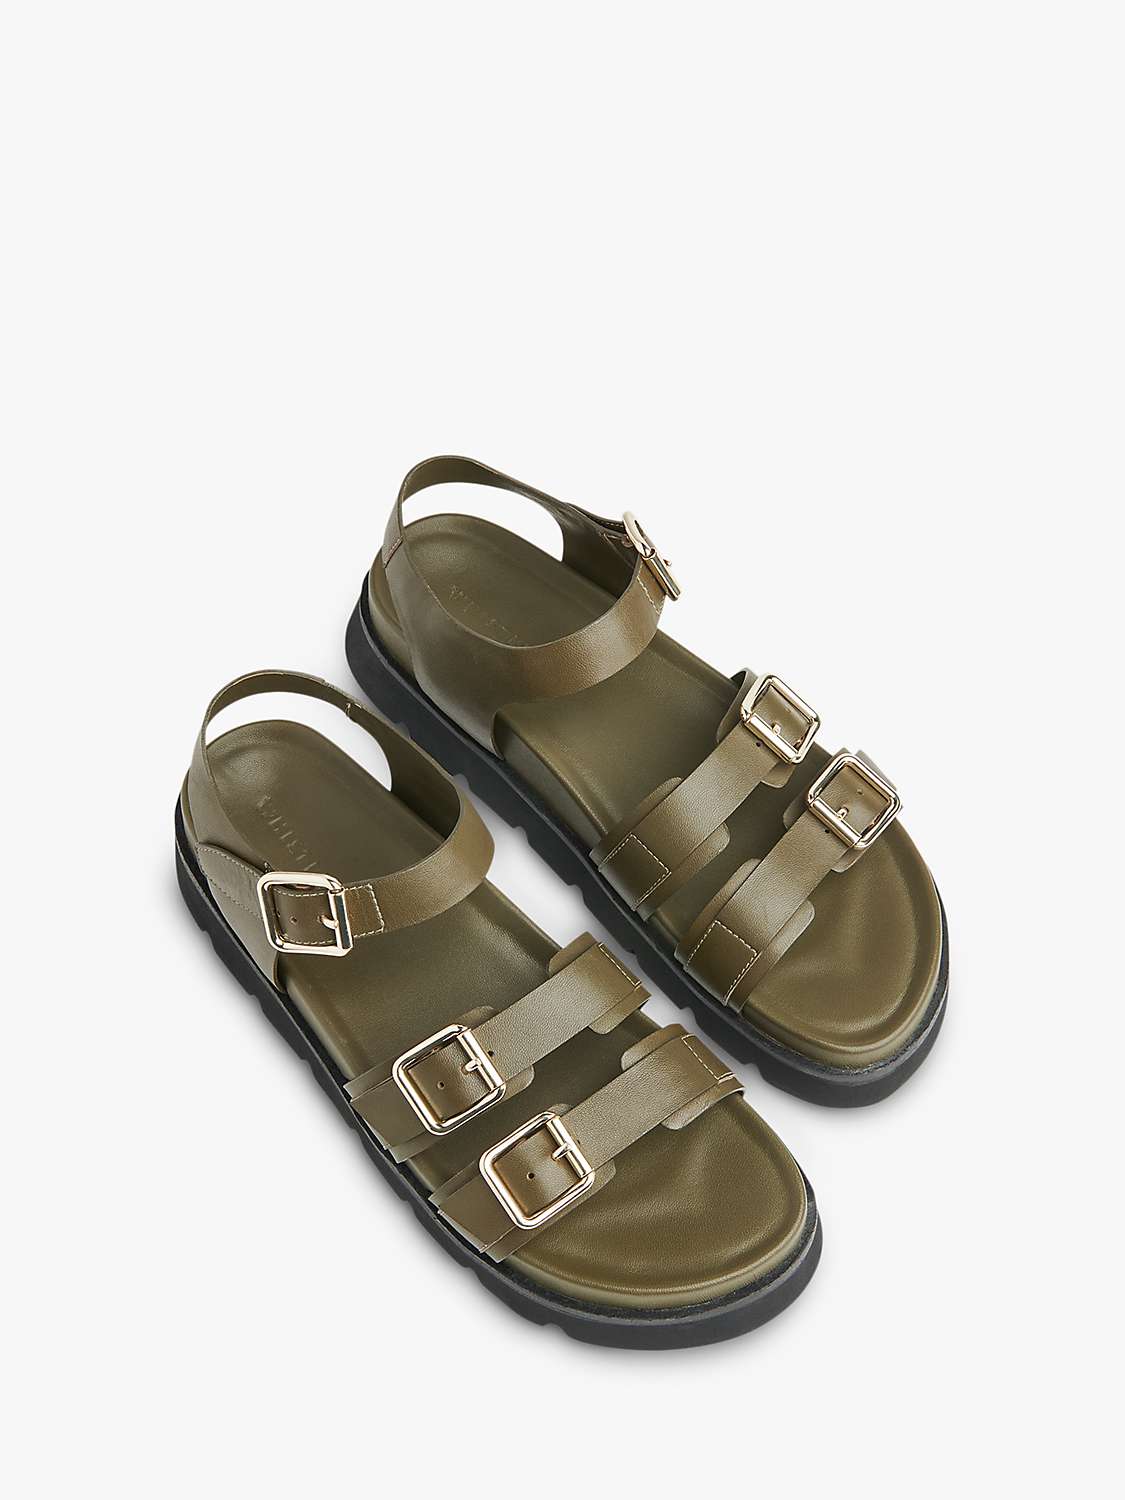 Buy Whistles Jemma Leather Triple Buckle Sandals Online at johnlewis.com